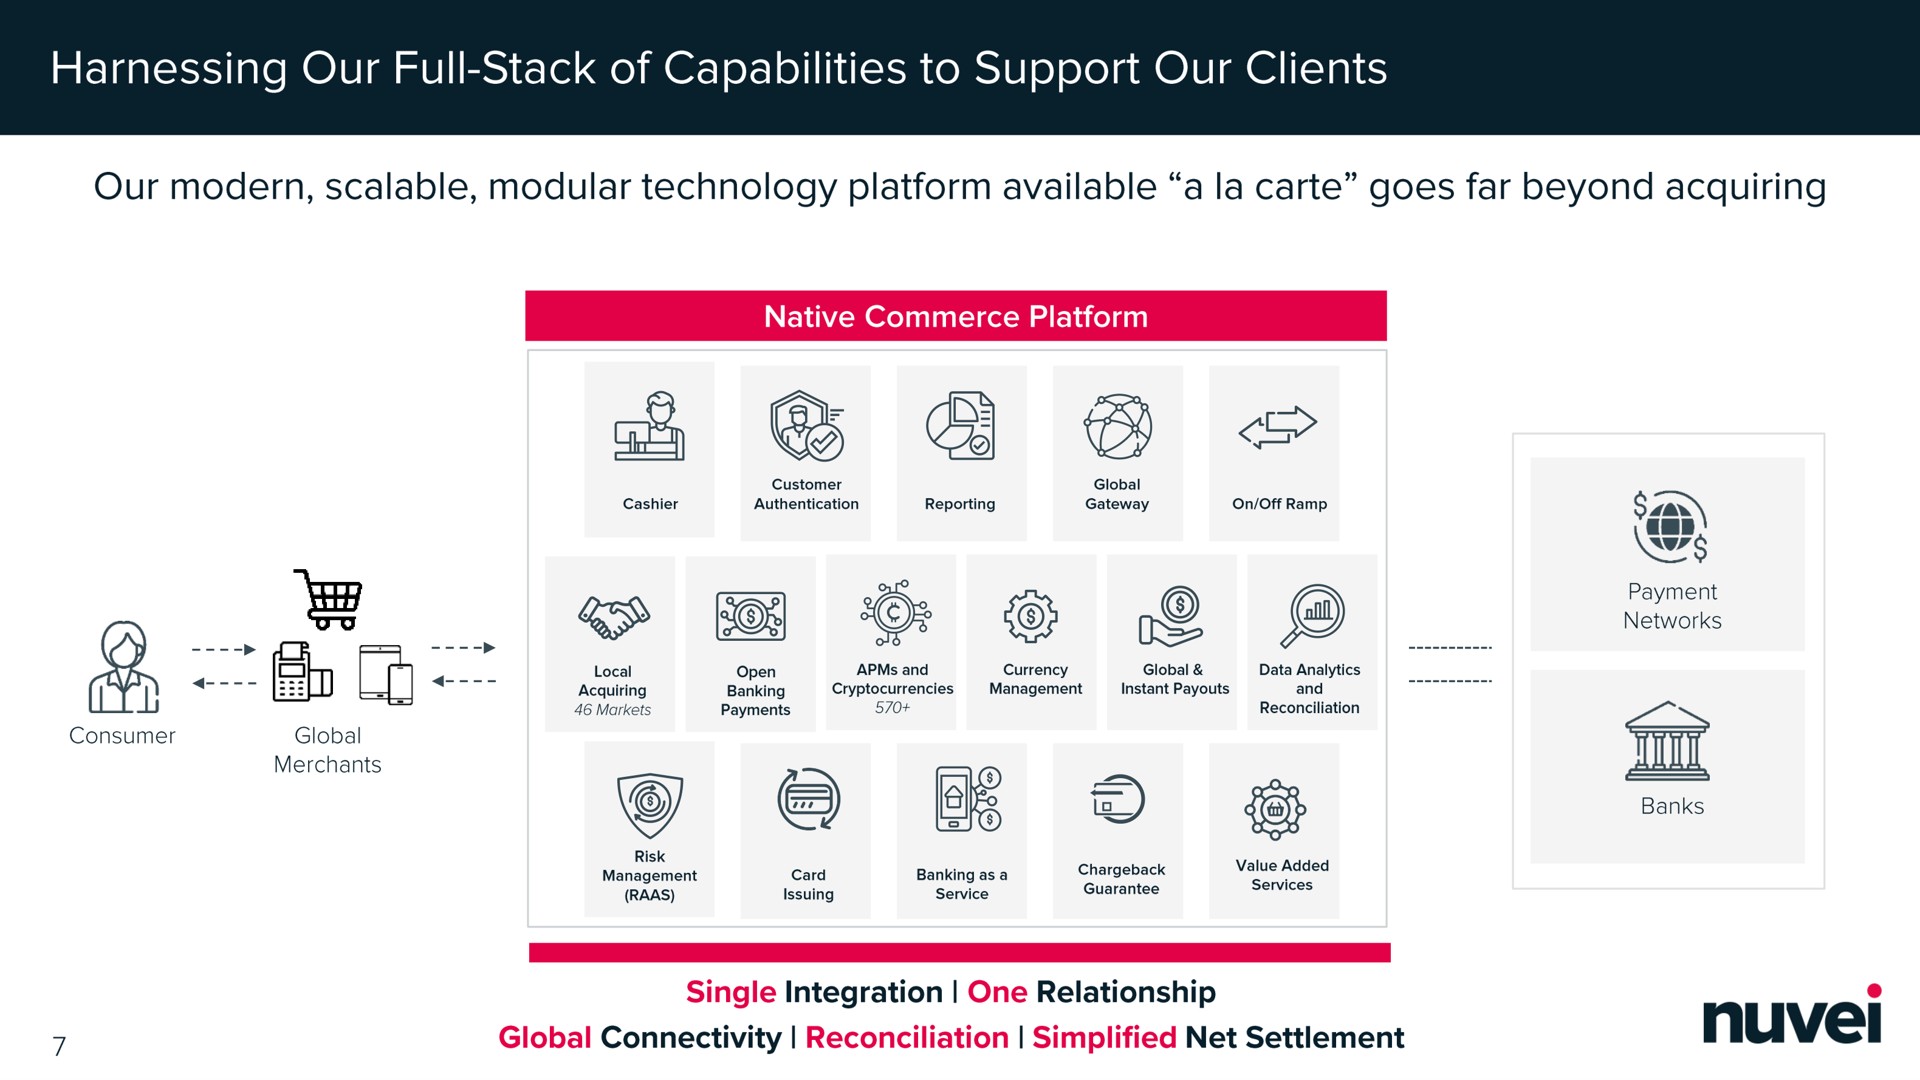 harnessing our full stack of capabilities to support our clients our modern scalable modular technology platform available a carte goes far beyond acquiring as comets global connectivity reconciliation simplified net settlement single integration one relationship | Nuvei